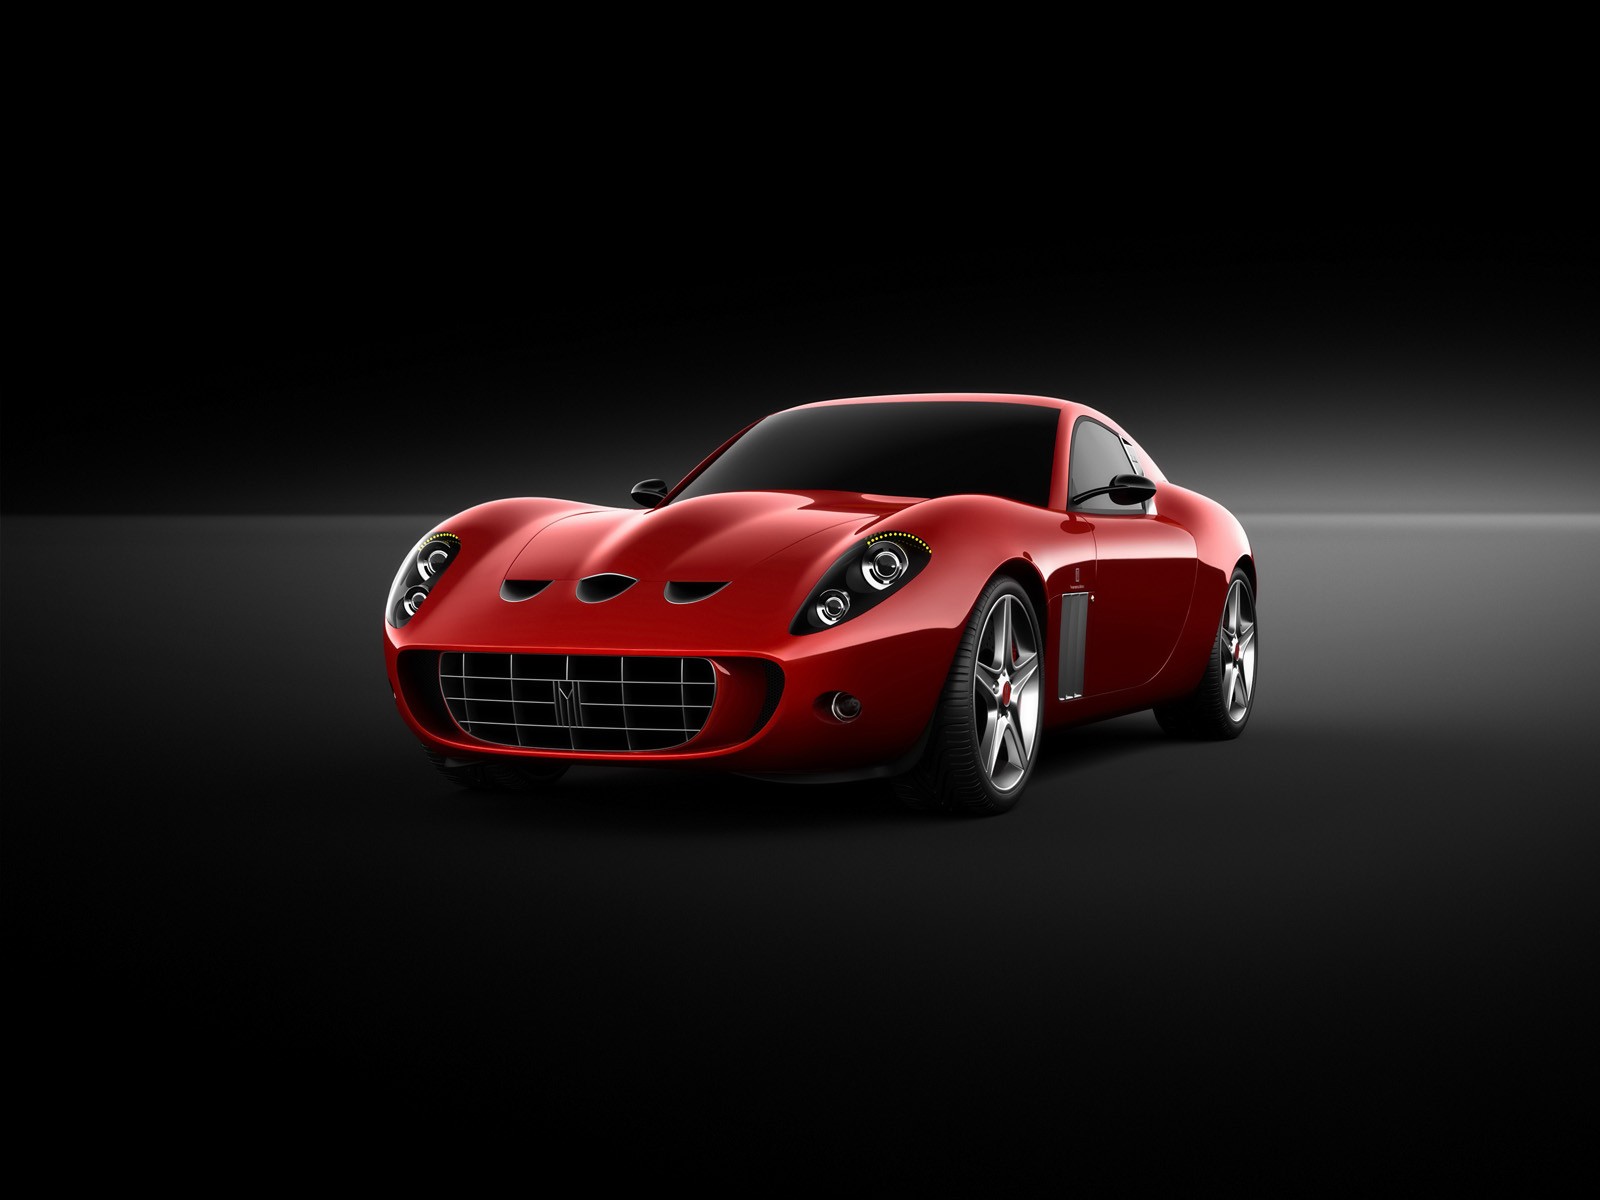  Ferrari GTO Wallpapers HD Images WSupercars